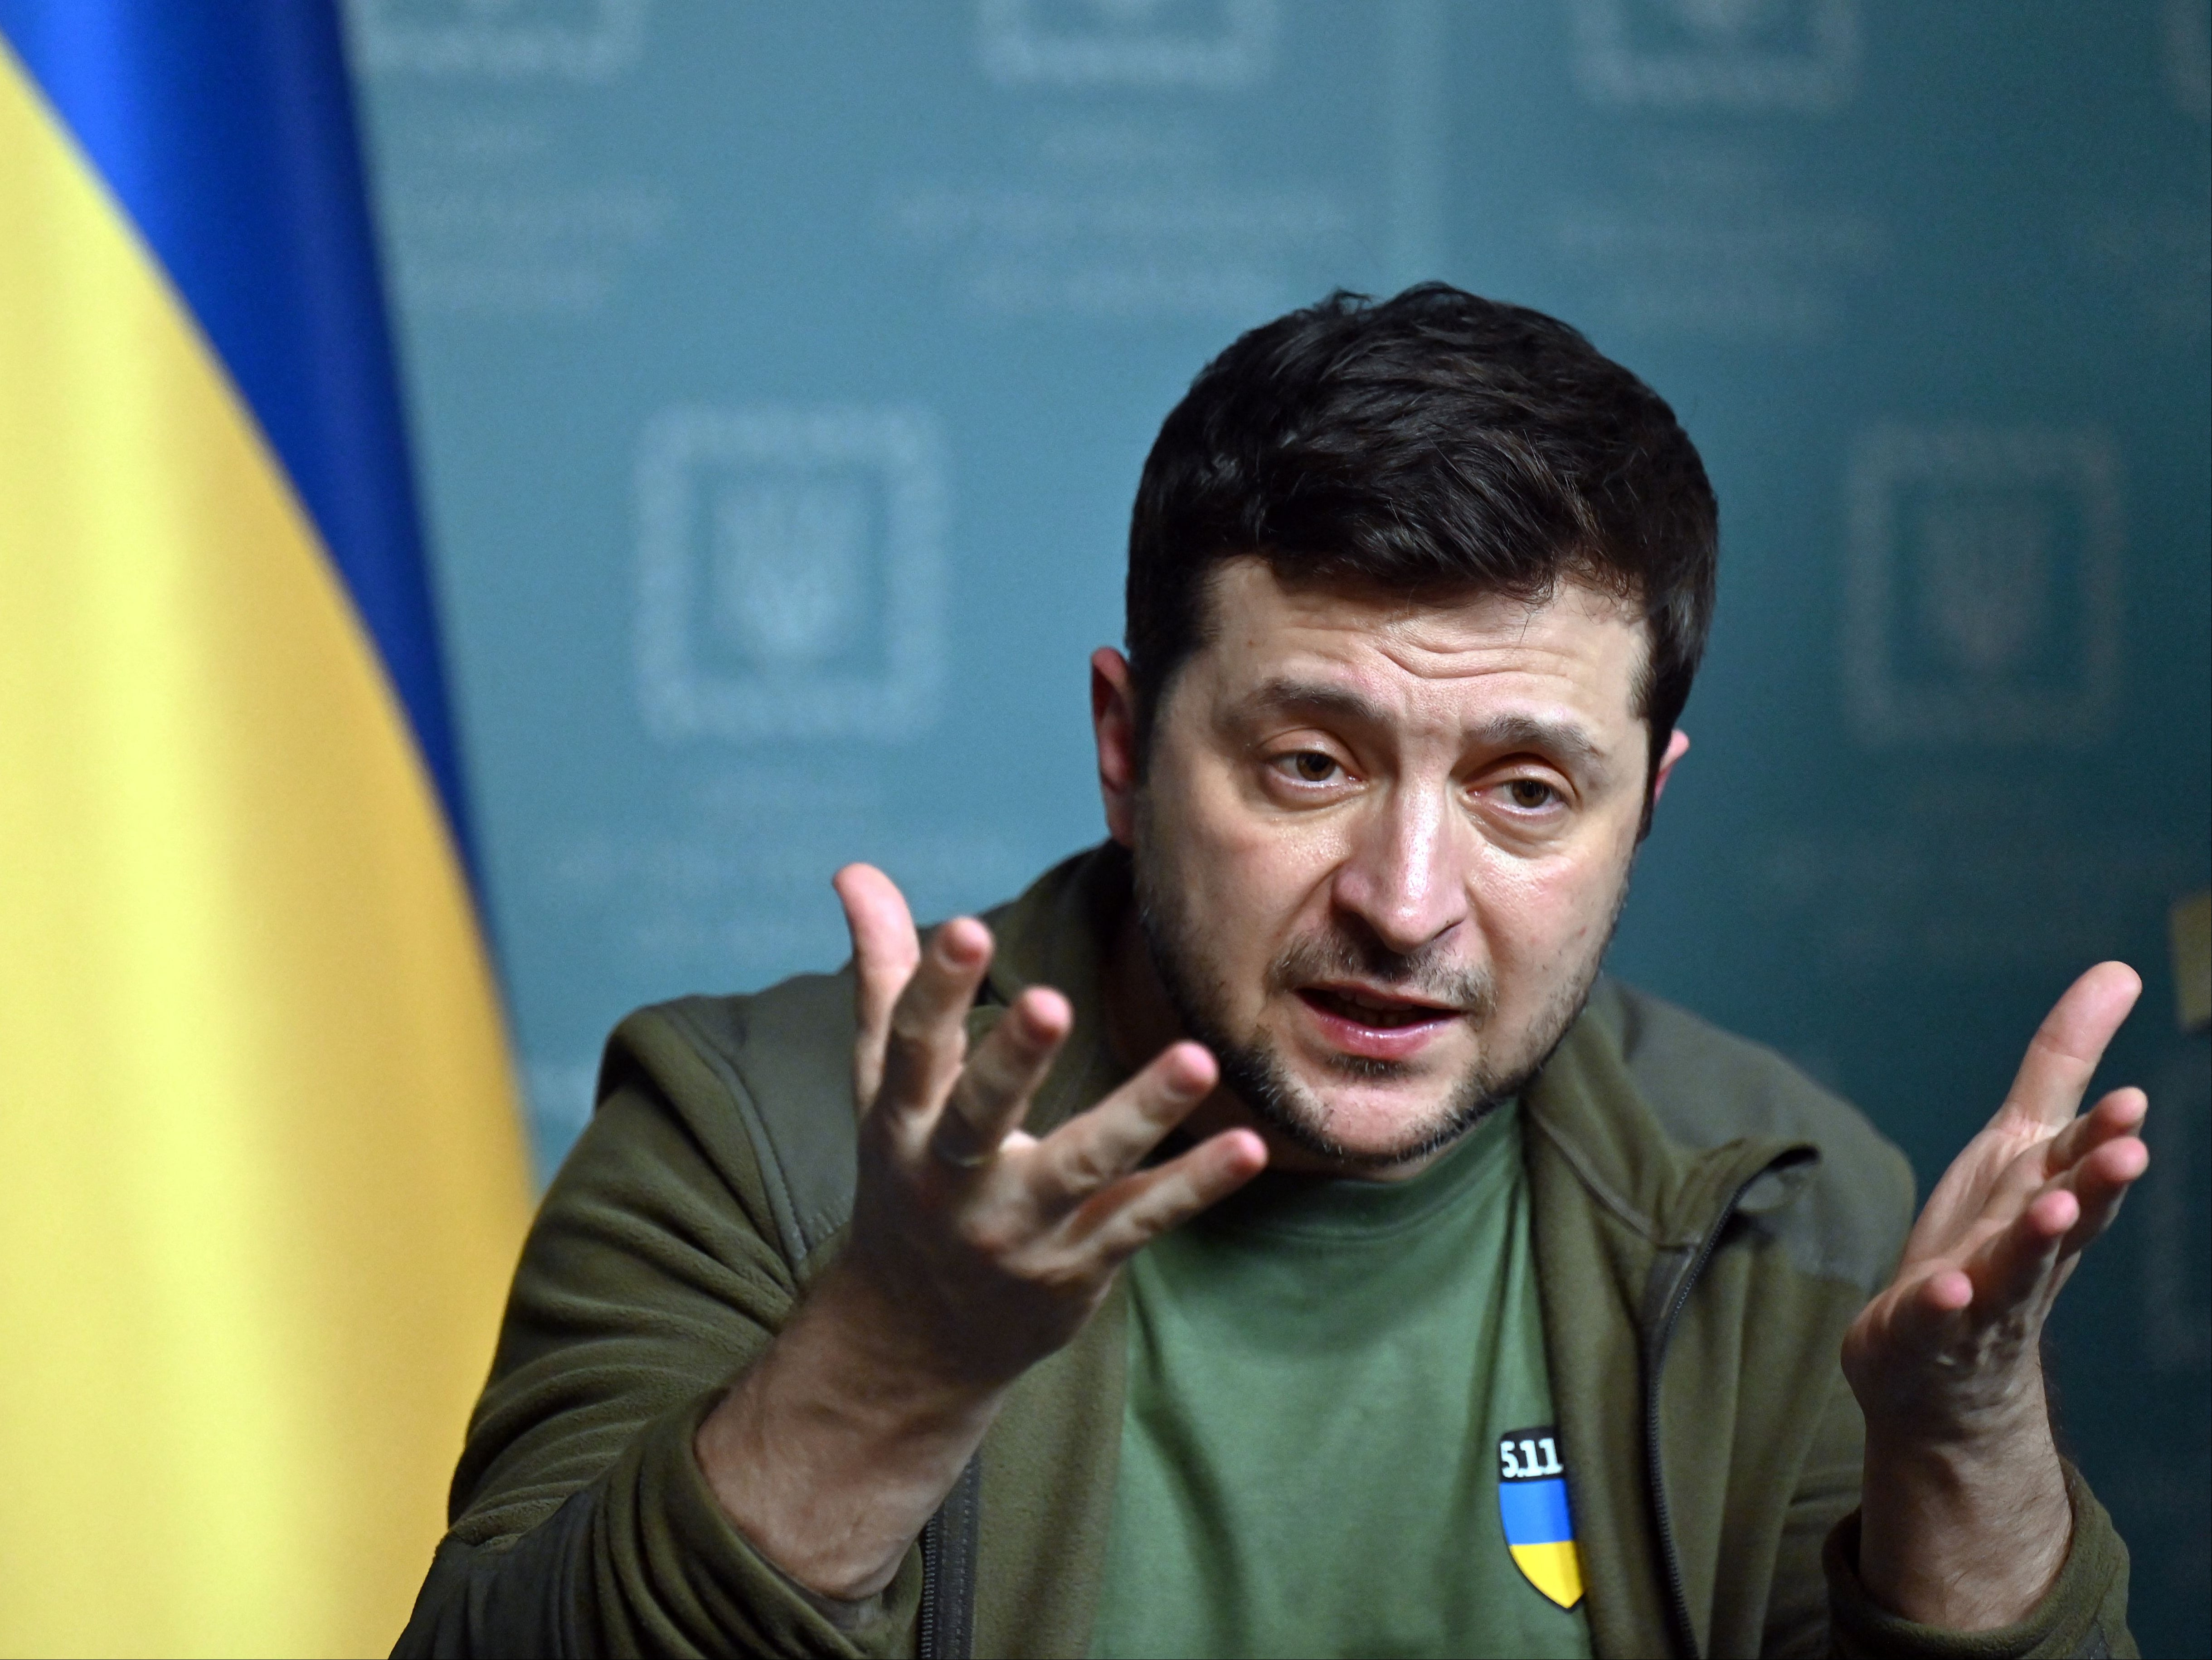 Volodymyr Zelensky has repeatedly called for a no-fly zone over Ukraine